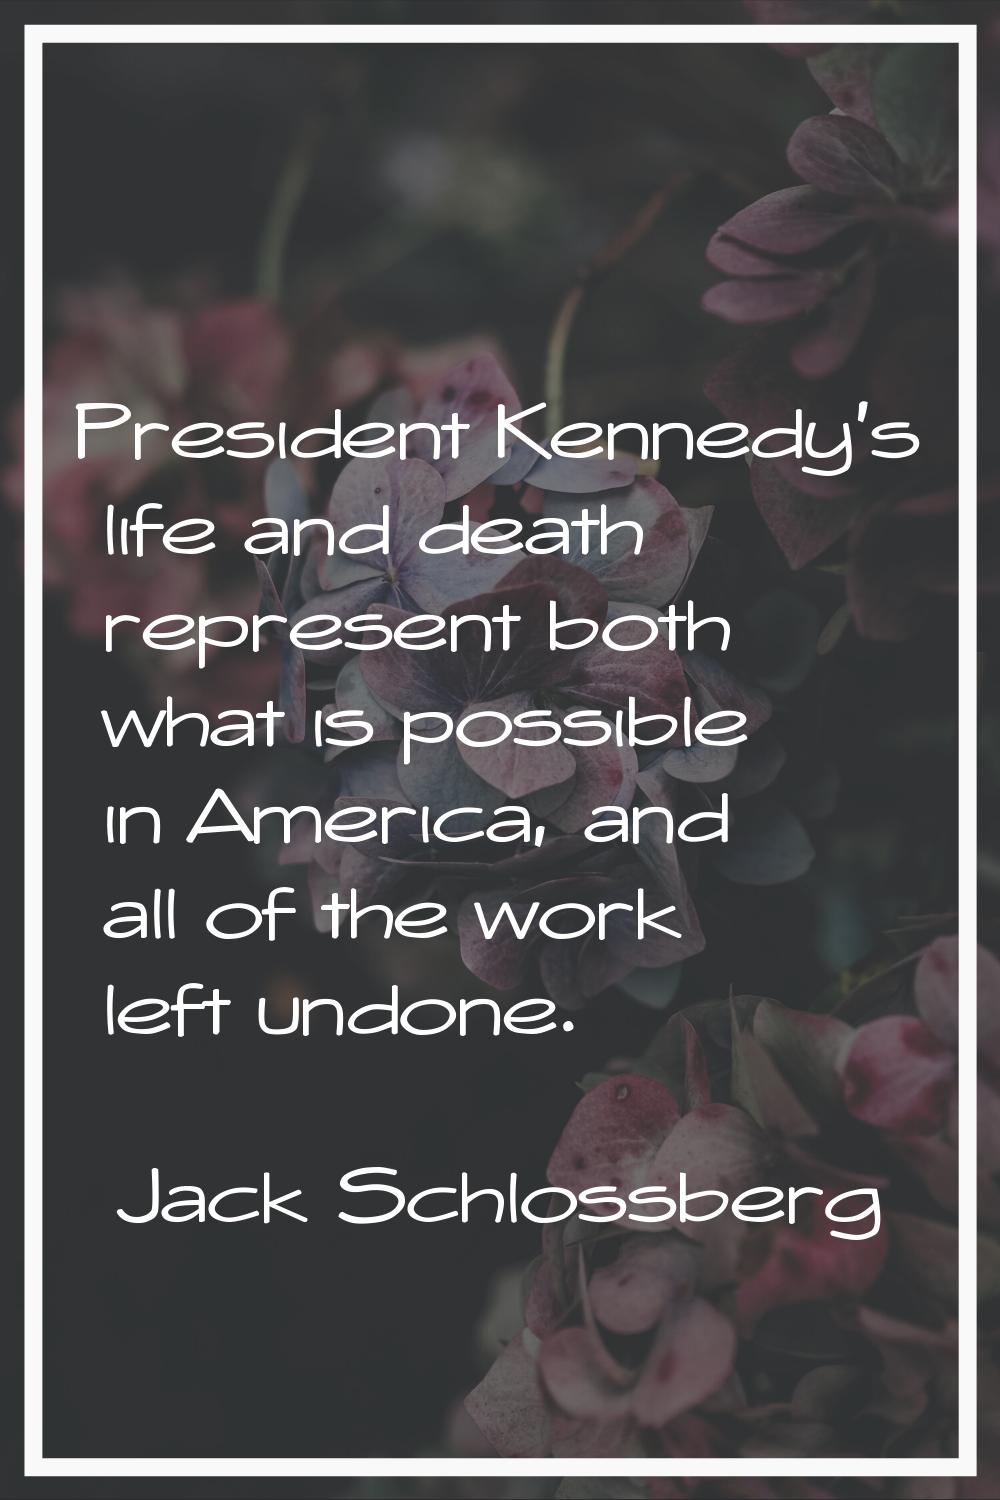 President Kennedy's life and death represent both what is possible in America, and all of the work 